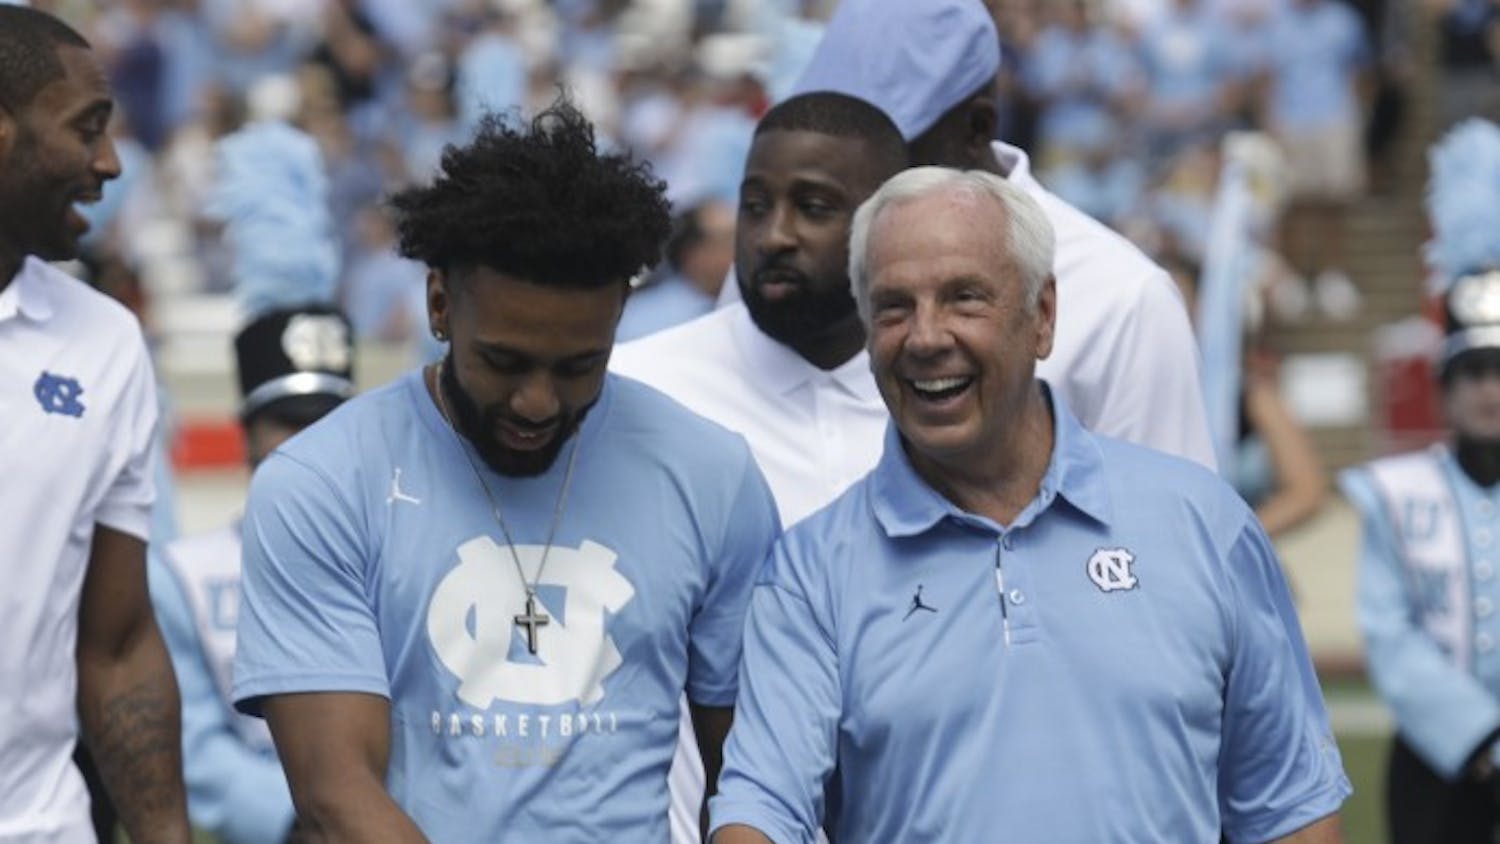 UNC senior point guard Joel Berry II (left) and UNC basketball head coach Roy Williams (right) show off their 2017 NCAA Men's Basketball championship rings during halftime of UNC's game against Louisville Saturday afternoon.&nbsp;